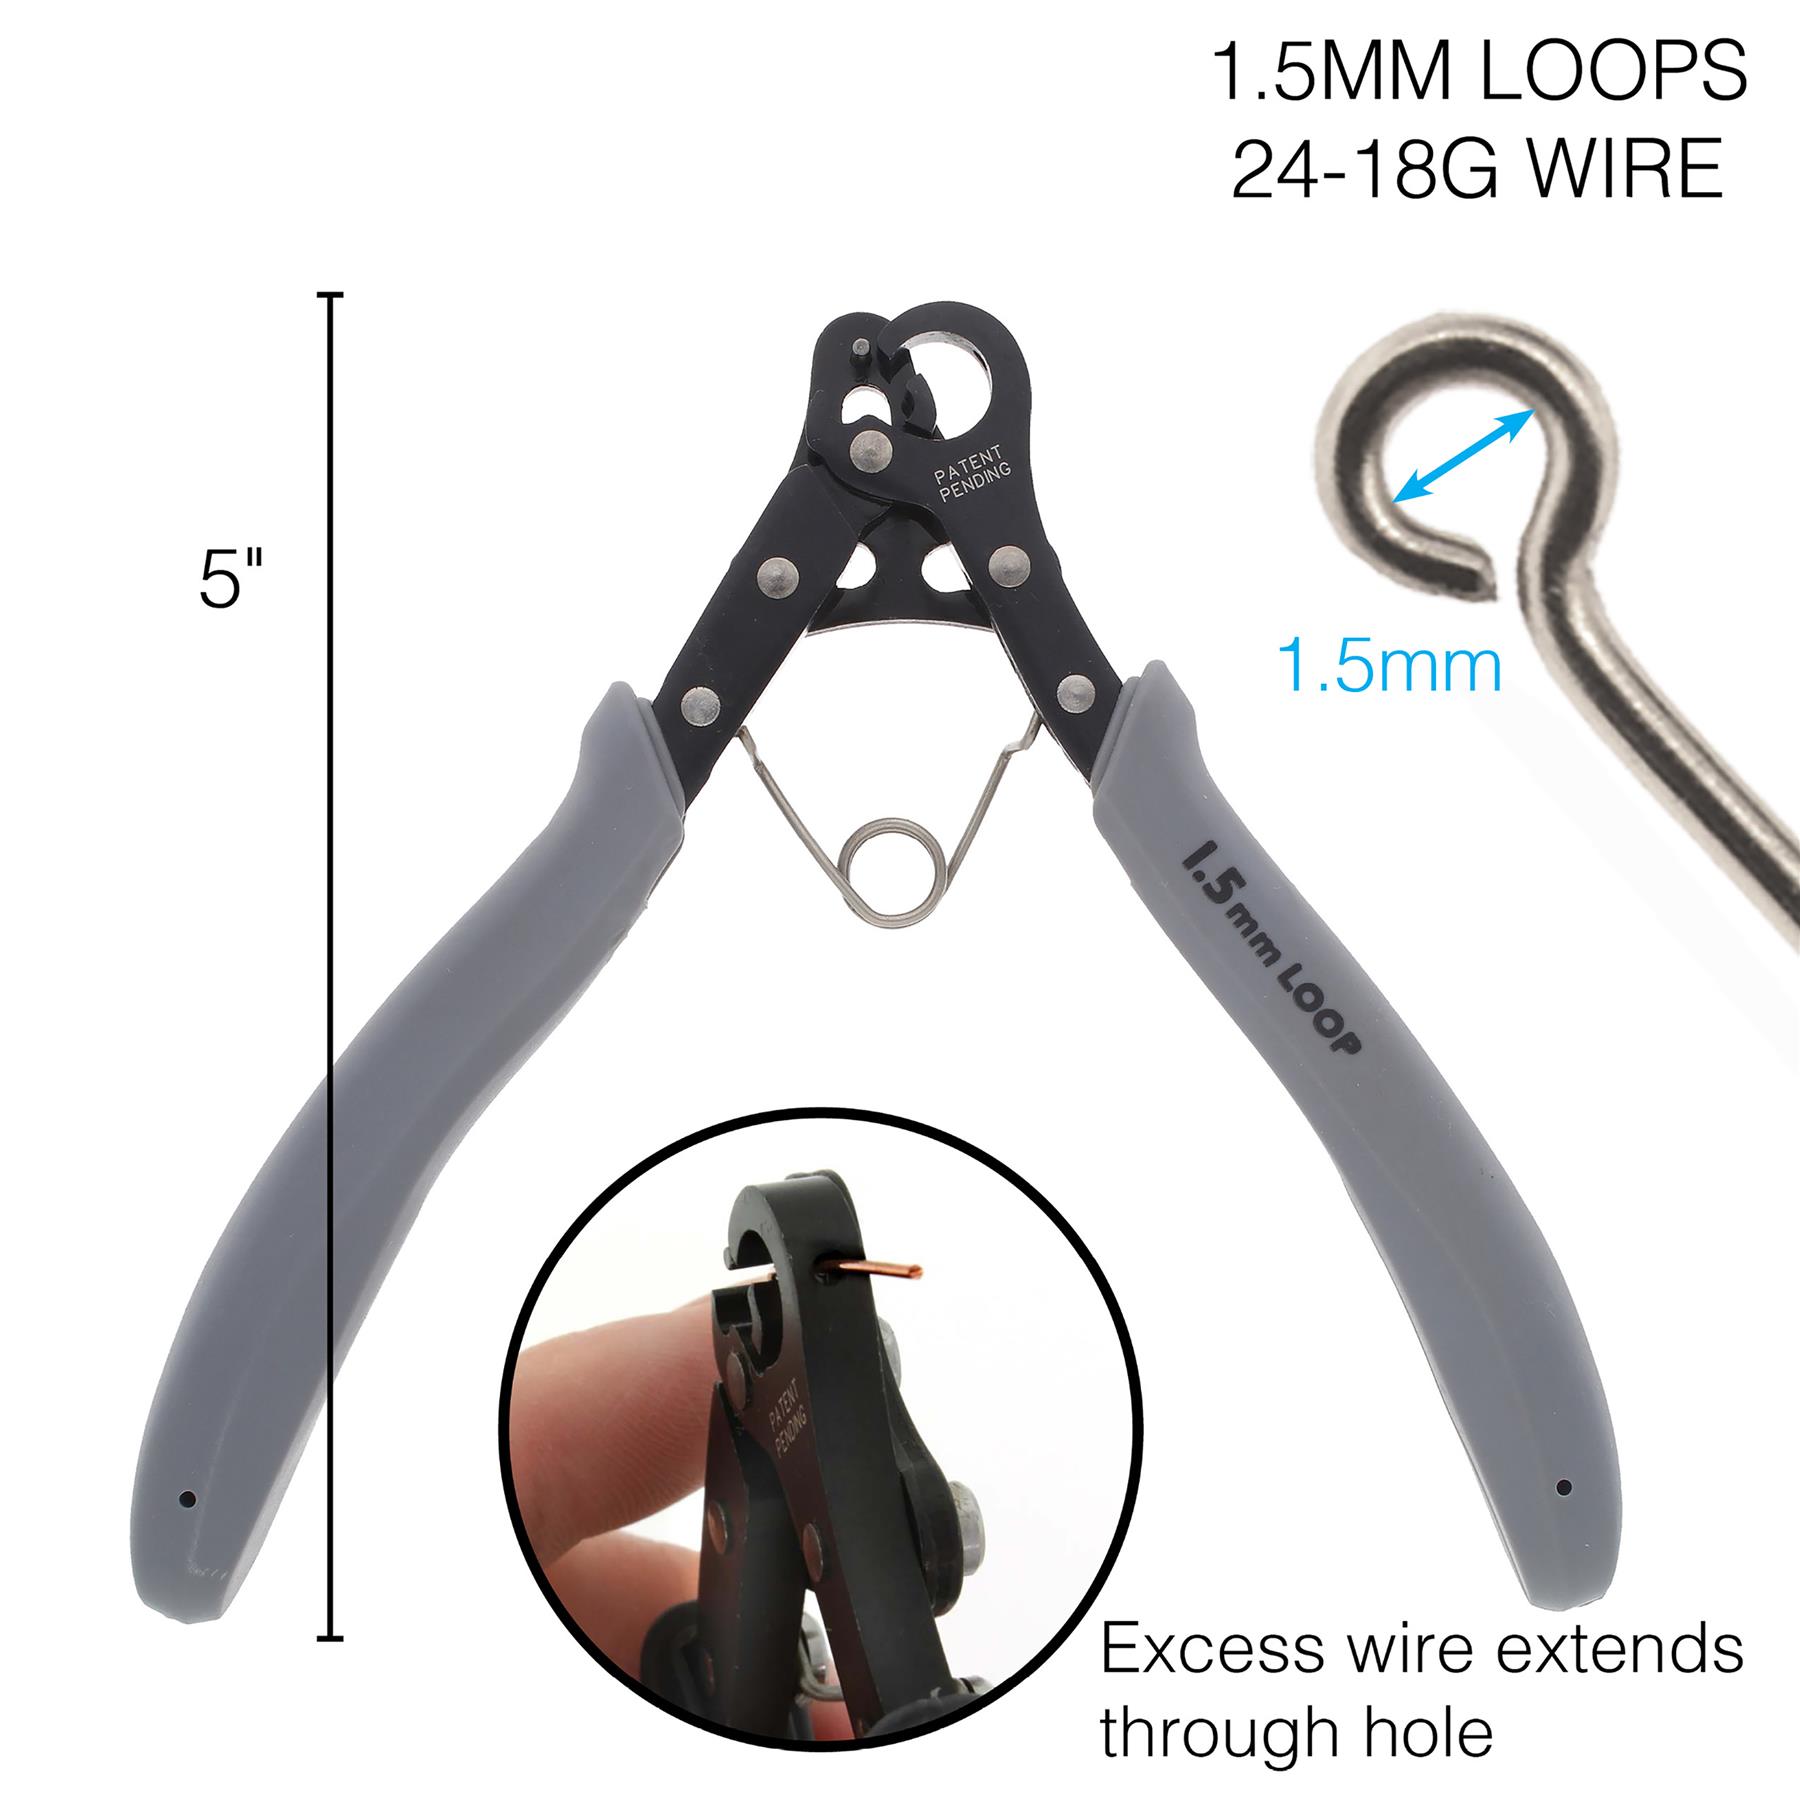 The Beadsmith Looper Kit – Includes A 1-Step Looper Plier & 2 Tarnish-Resistant Wire Spools, 15 Yards Each in Silver & Gold – Create Consistent